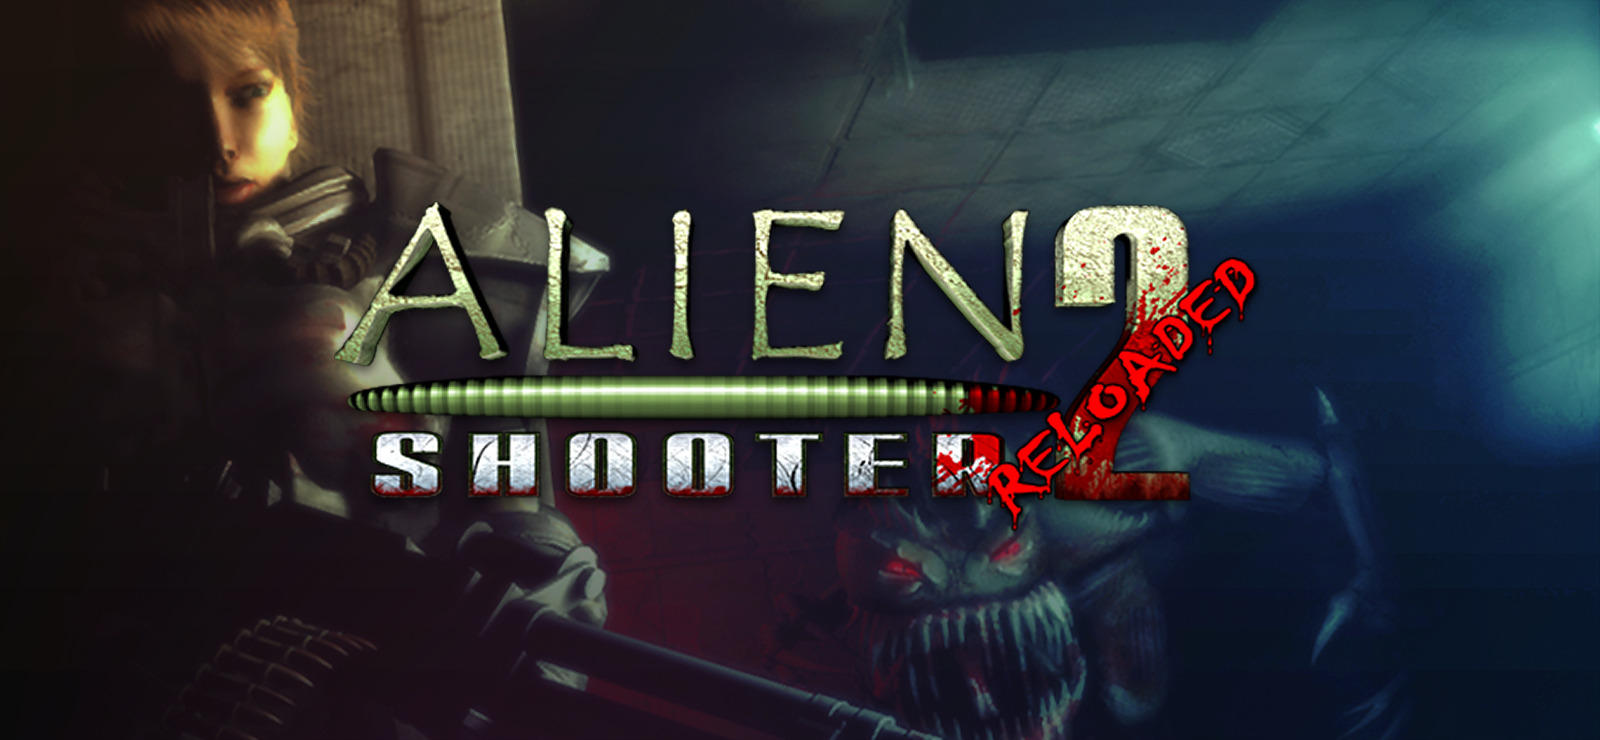 play shooter online